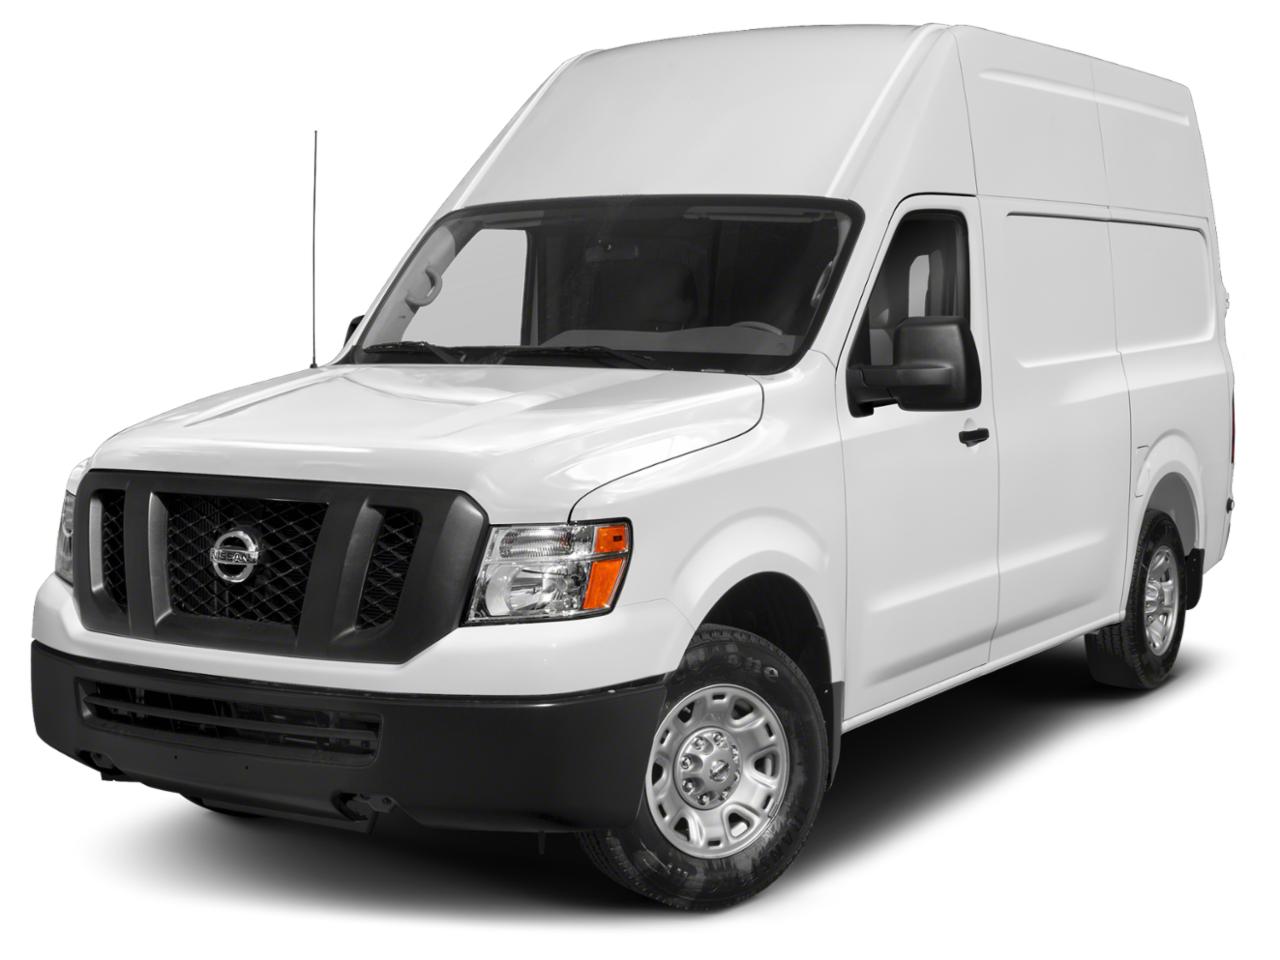 2020 Nissan NV Cargo Vehicle Photo in ENGLEWOOD, CO 80113-6708